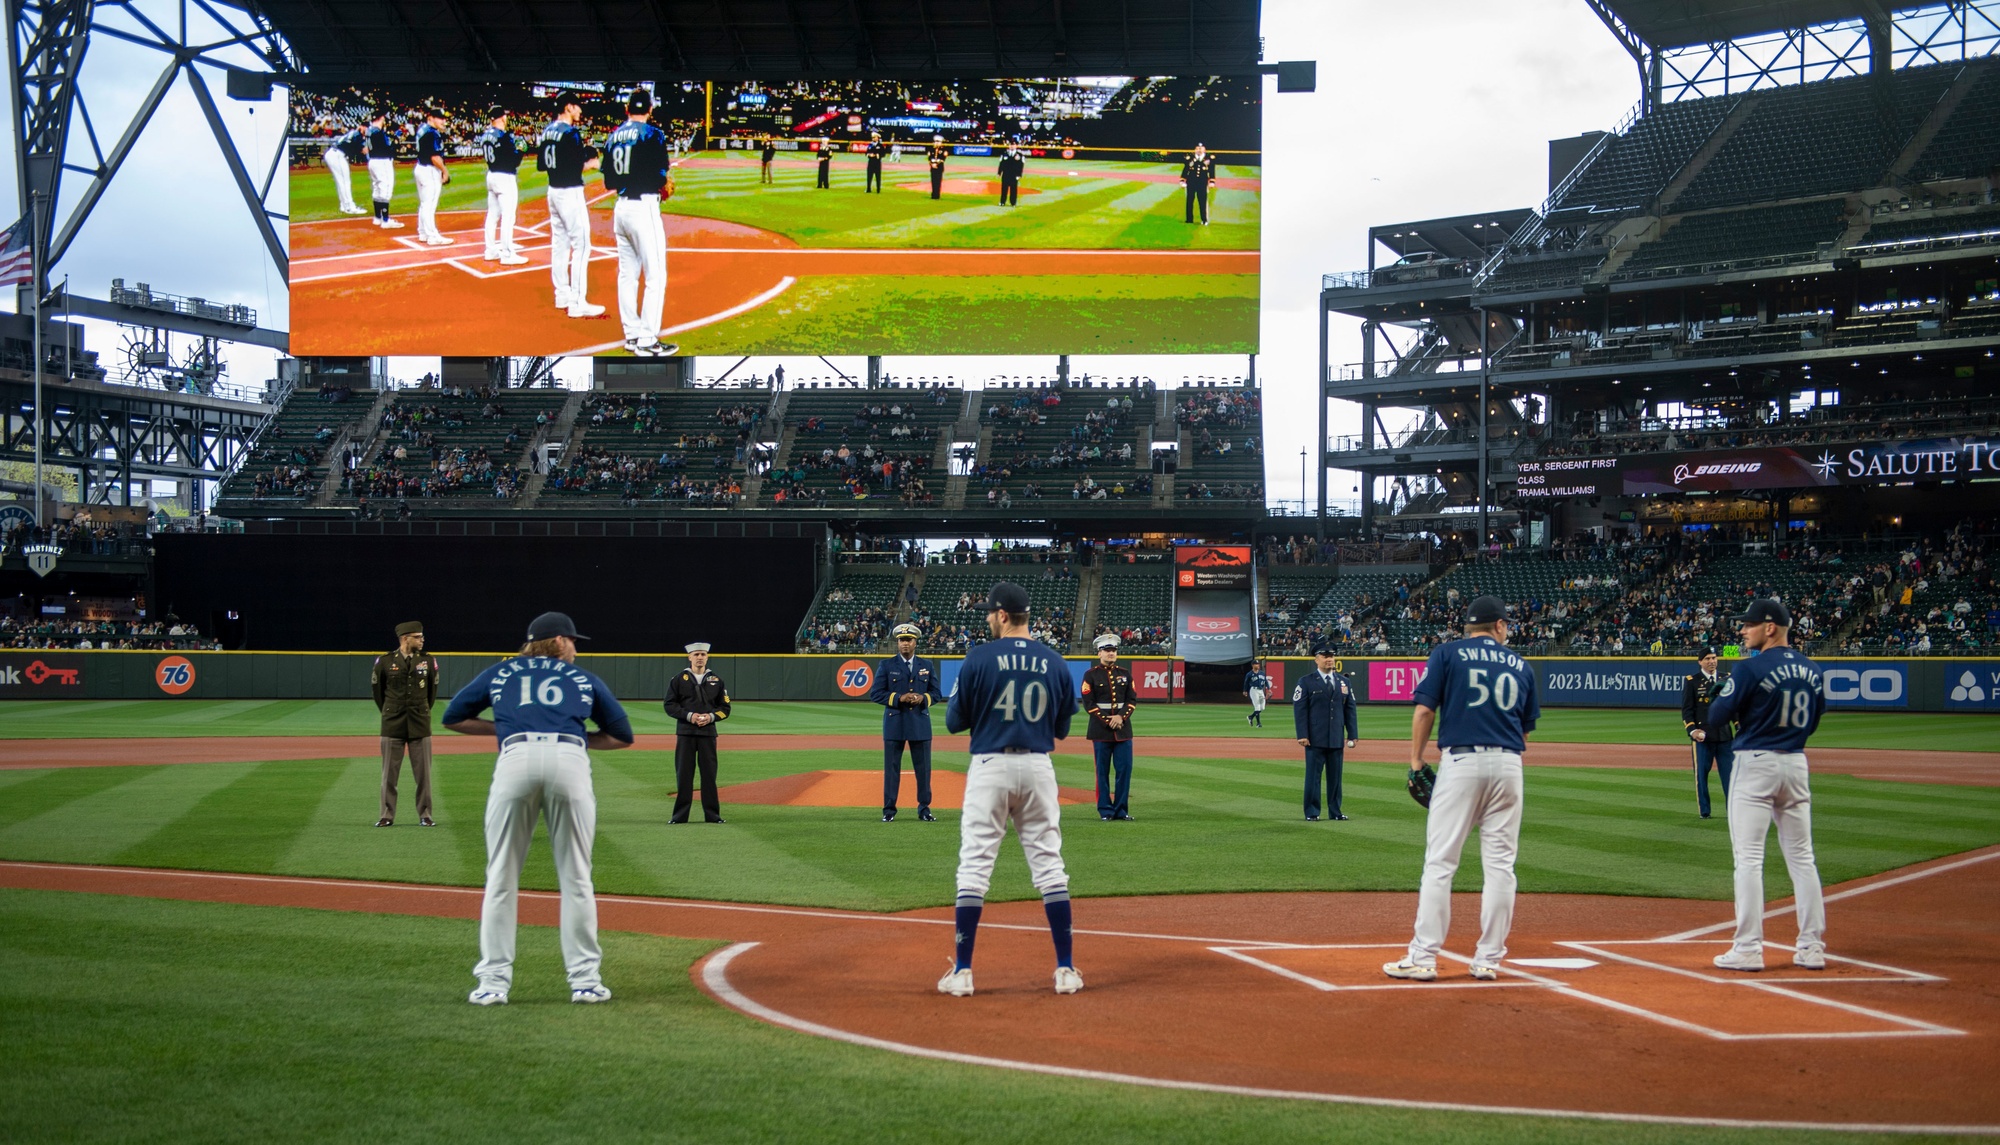 DVIDS - Images - Seattle Mariners Salute the Armed Forces Night [Image 10  of 10]